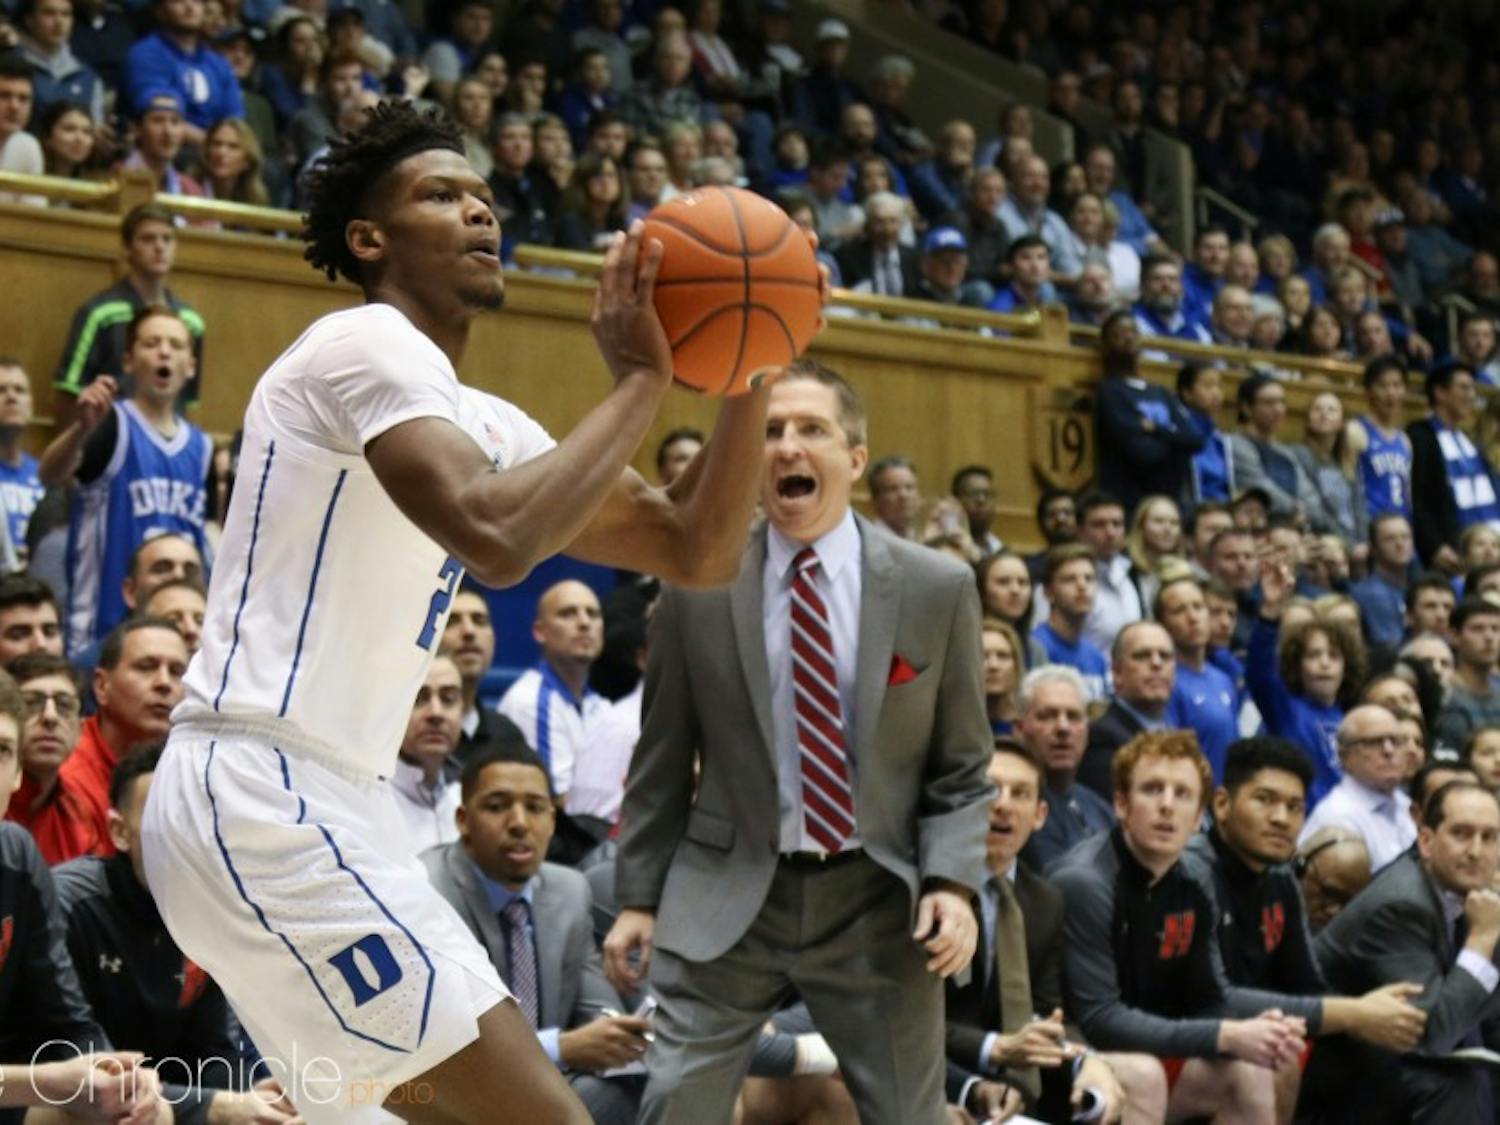 If Cam Reddish gets more open looks in transition, it will open up the floor against Notre Dame.